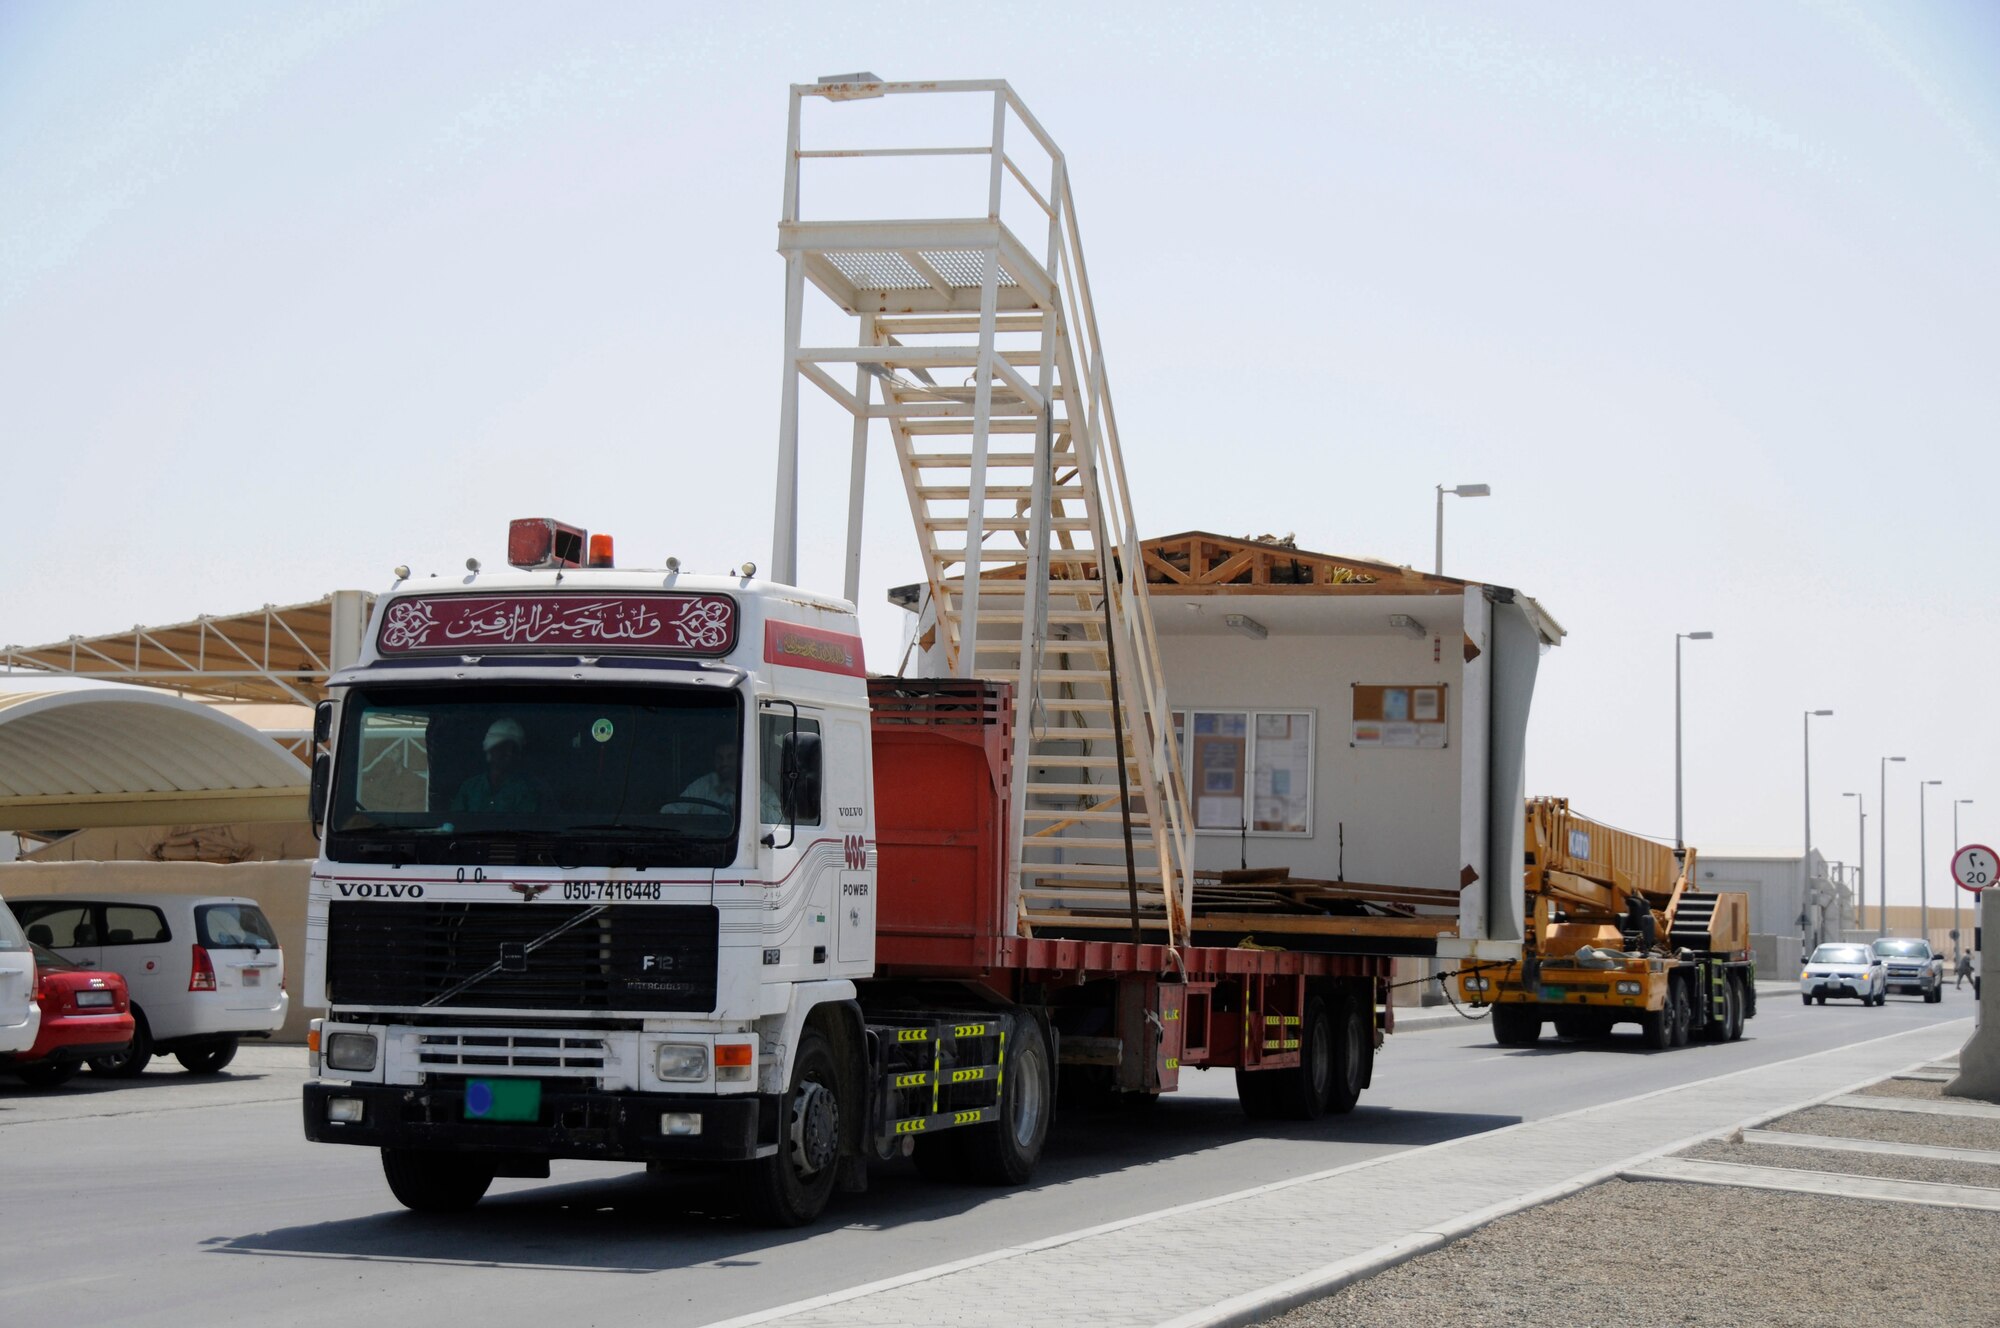 SOUTHWEST ASIA - A truck carrying a second story section of a building and a staircase is escorted to its new site, Mar 19. The building is used for lodging where new Airman and Soldiers can acquire room assignments and keys as well as pick-up linen for their beds. Lodging is also responsible for bedding down any distinguished visitors or diverted flight members to ensure their comfort. The lodging building was moved to make room for dormitory expansion. (U.S. Air Force photo by Senior Airman Brian J. Ellis) (Released)